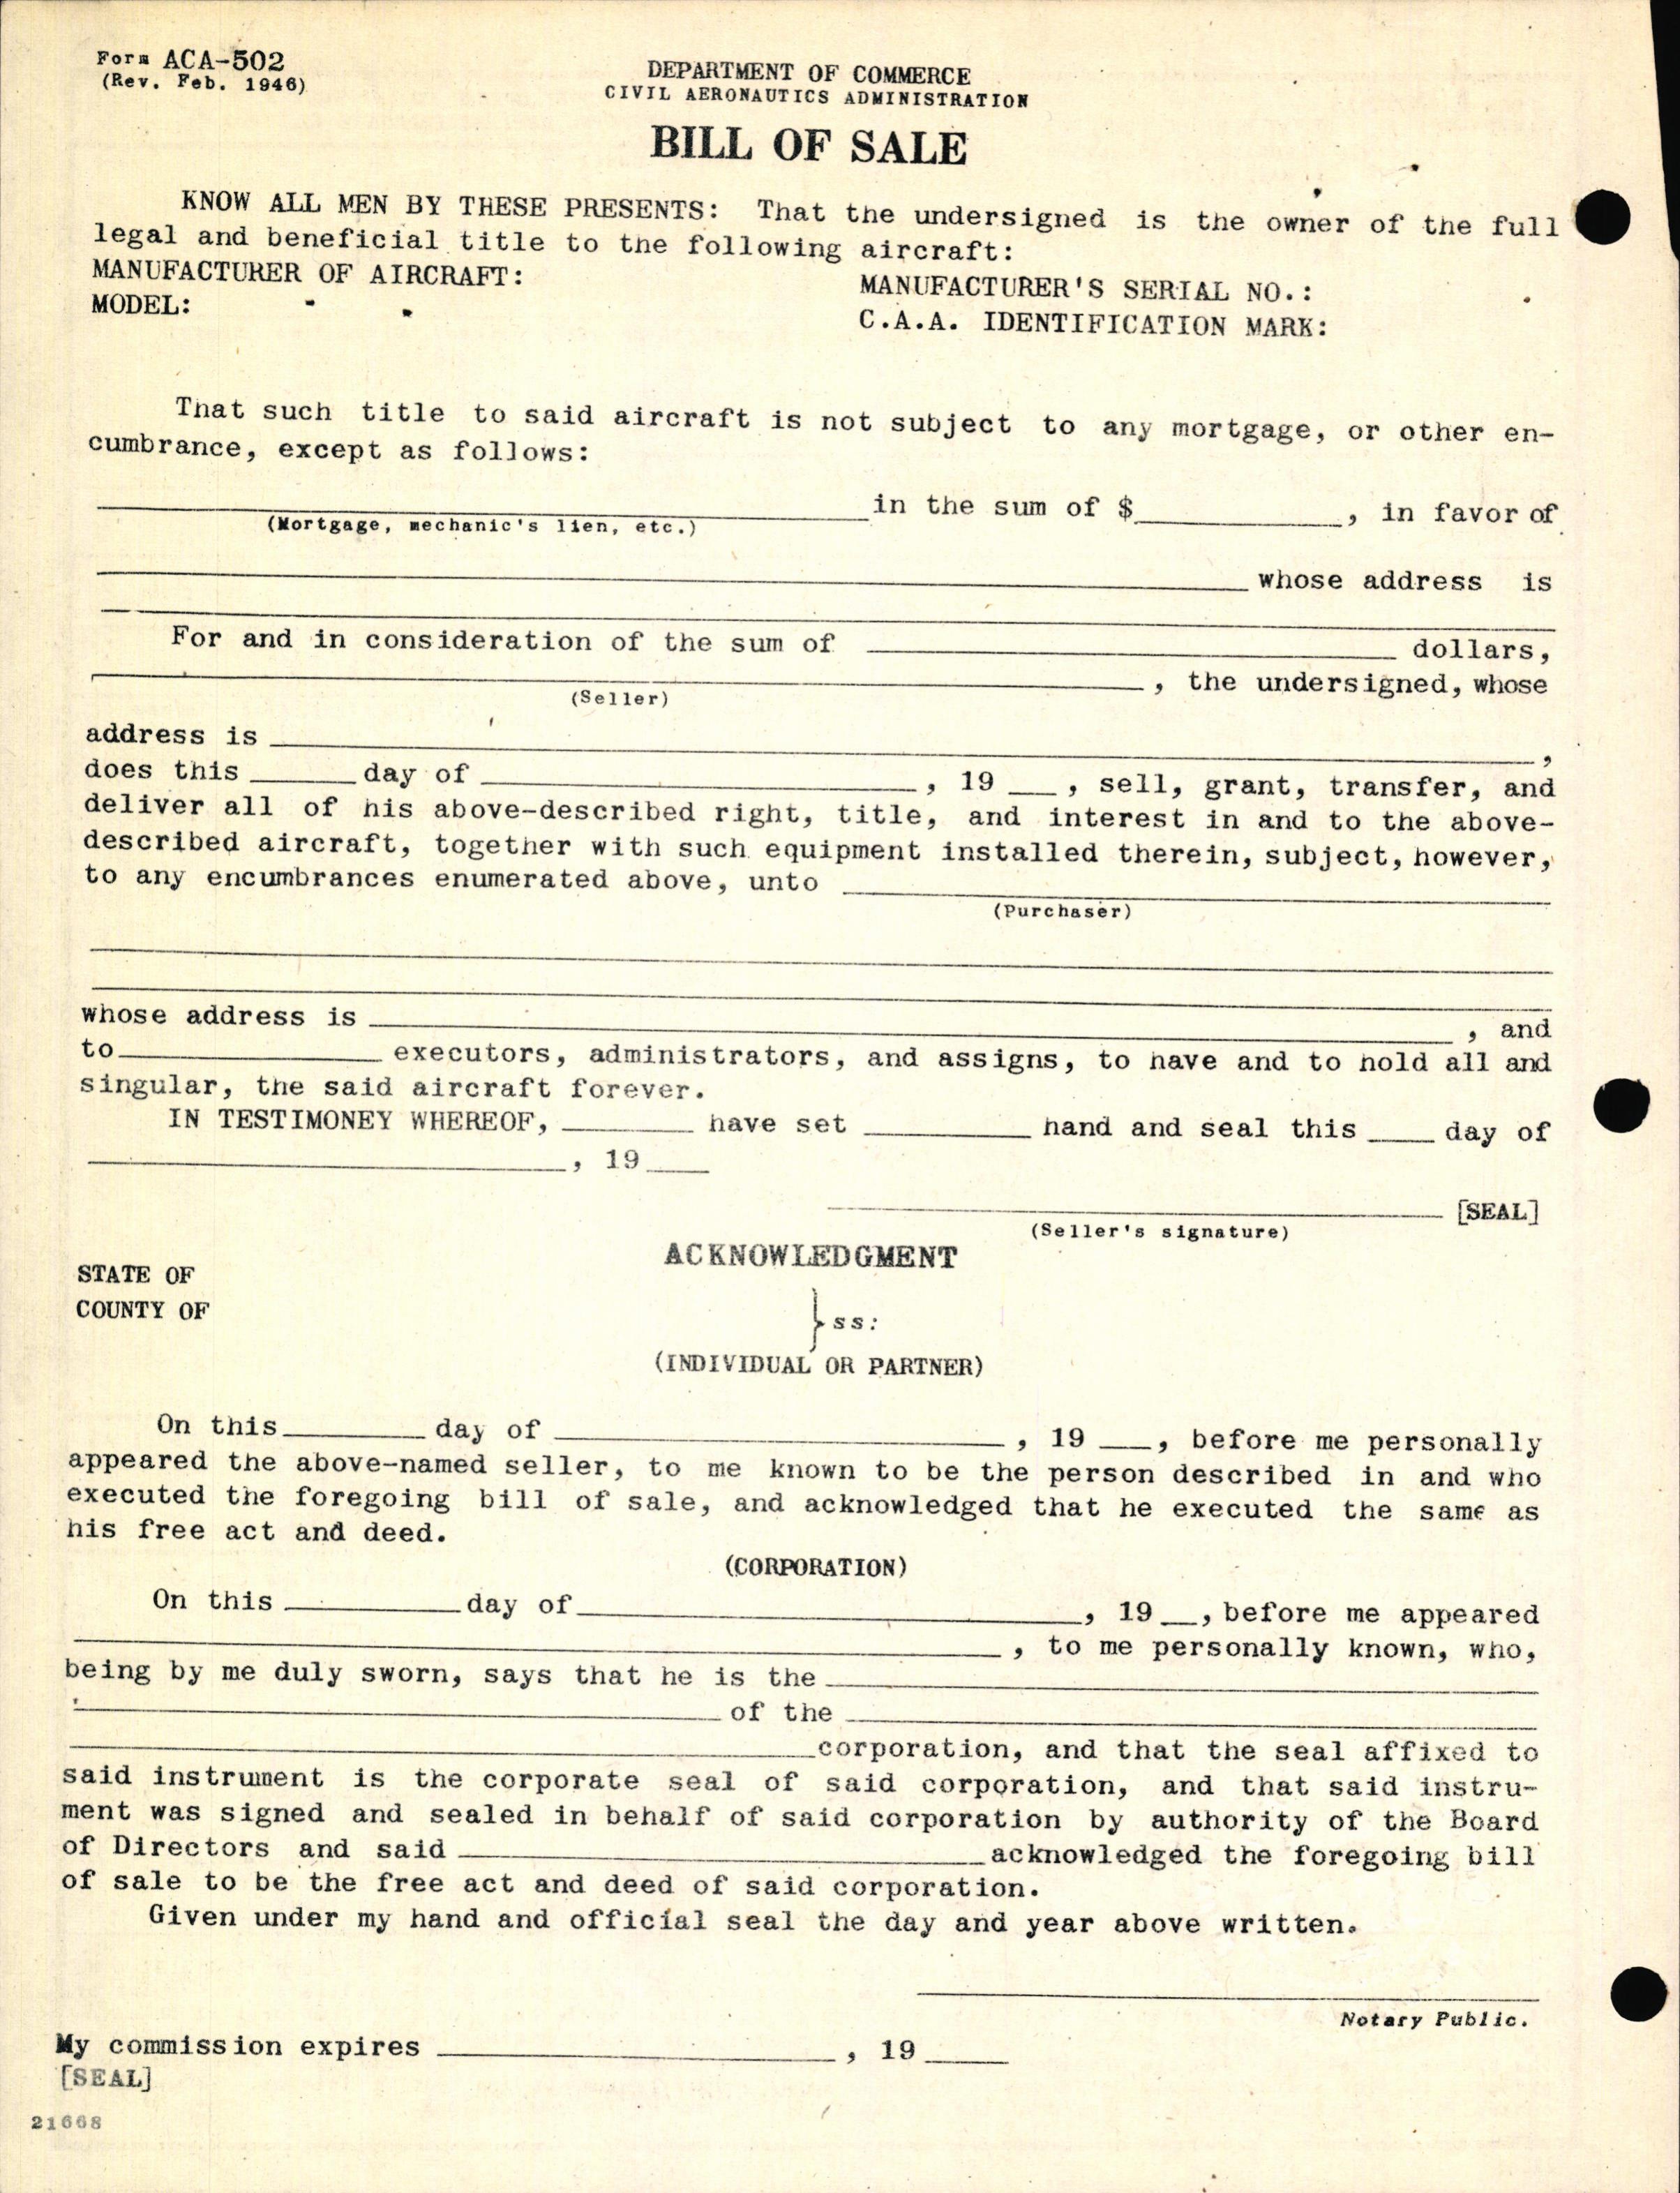 Sample page 2 from AirCorps Library document: Technical Information for Serial Number 2067